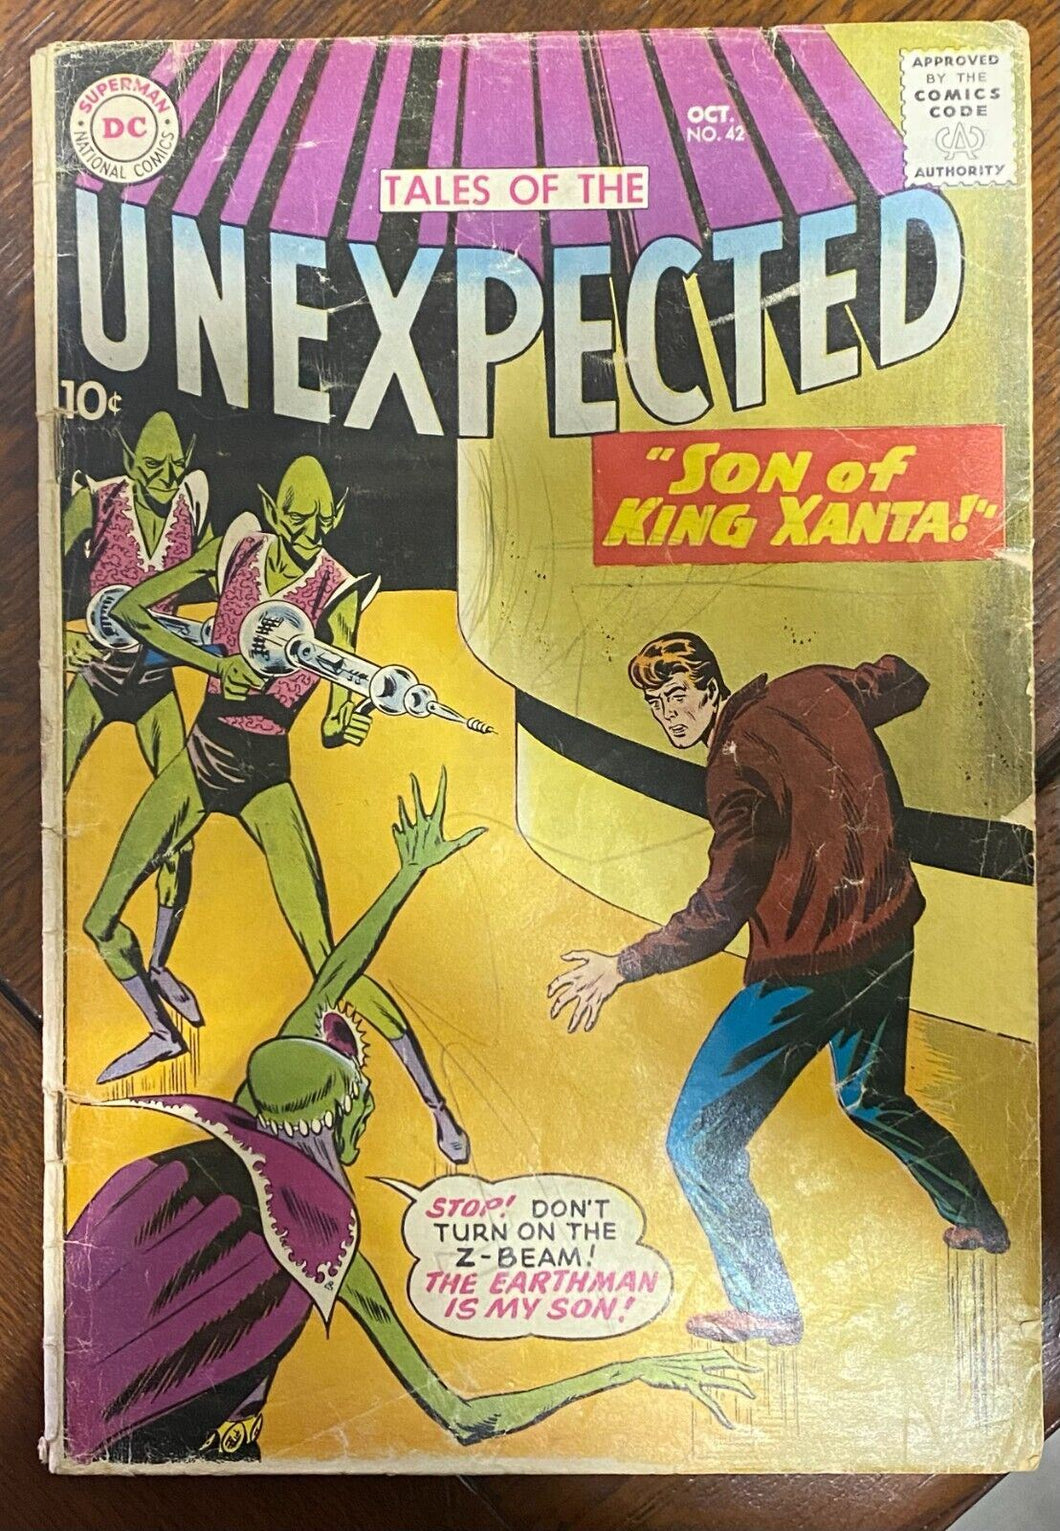 1959 DC Comics Tales of the Unexpected Issue #42